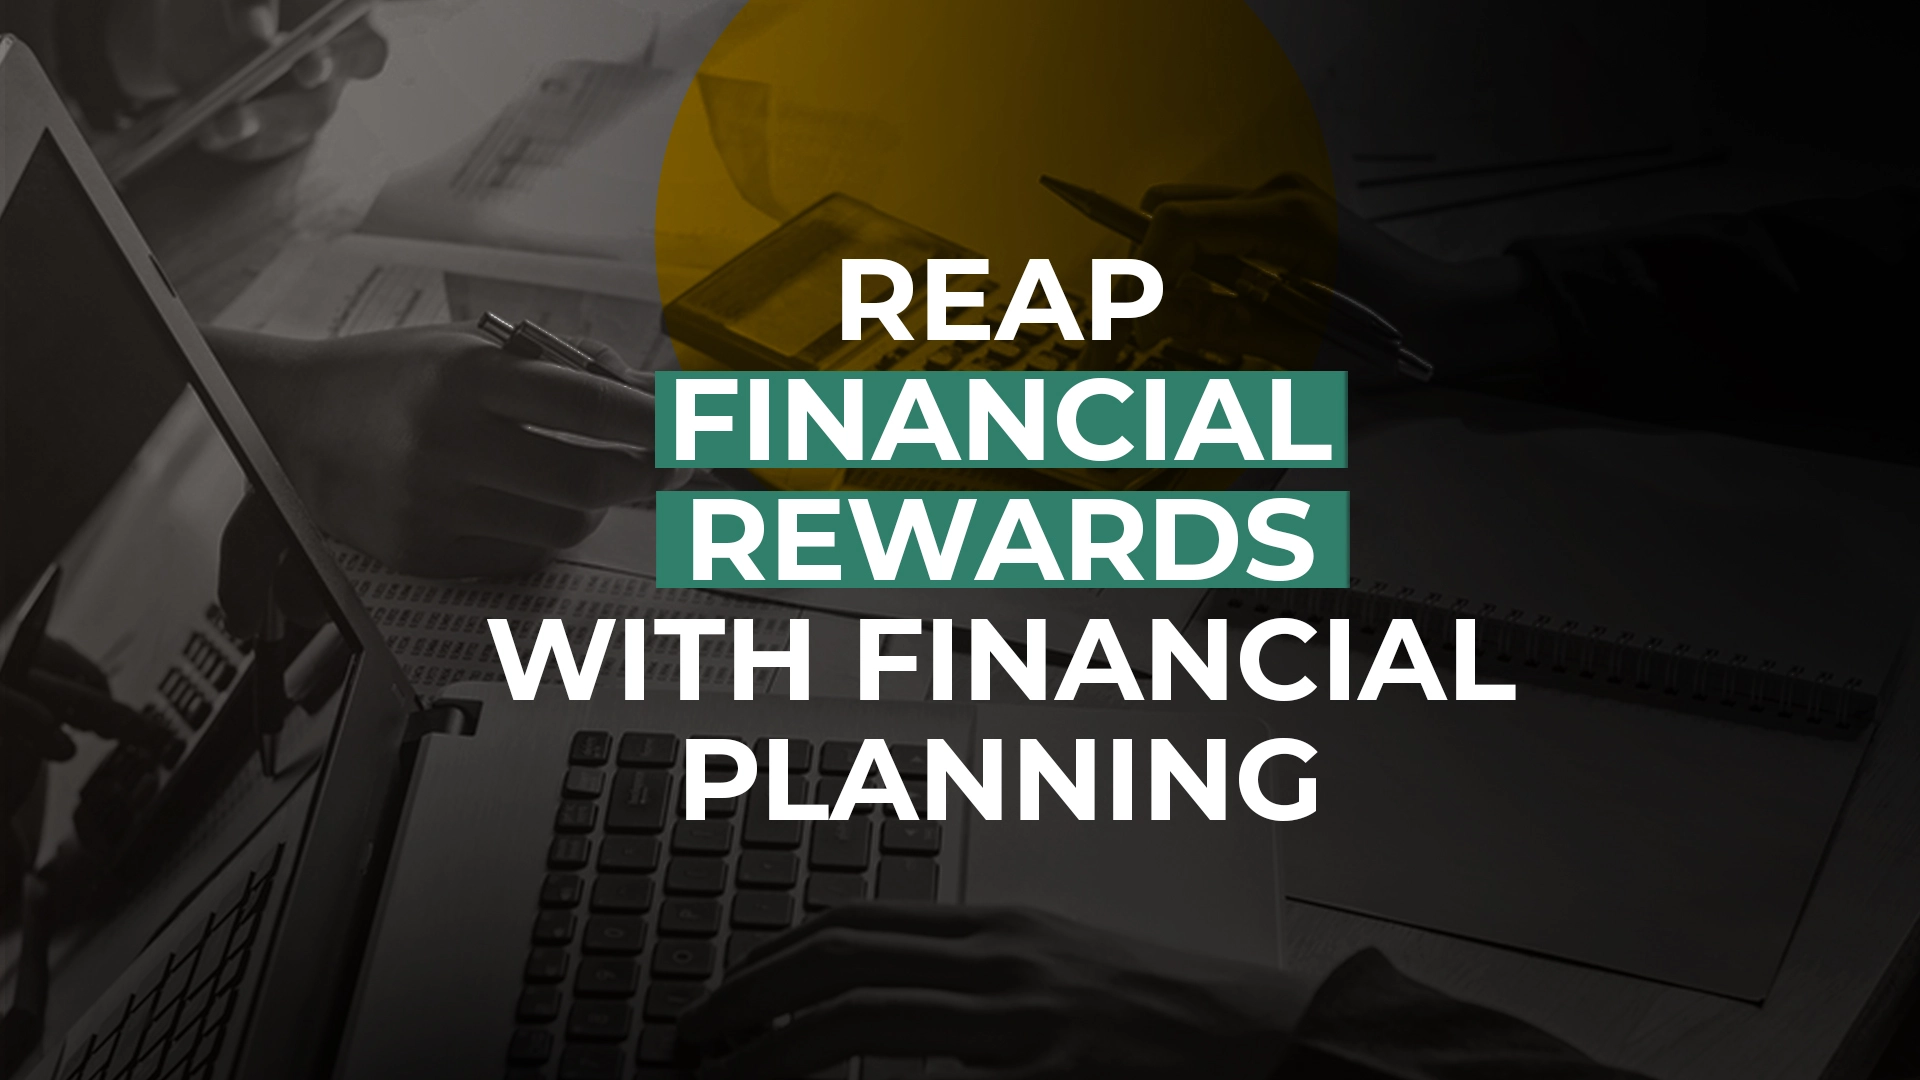 Reap Financial Rewards with Financial Planning